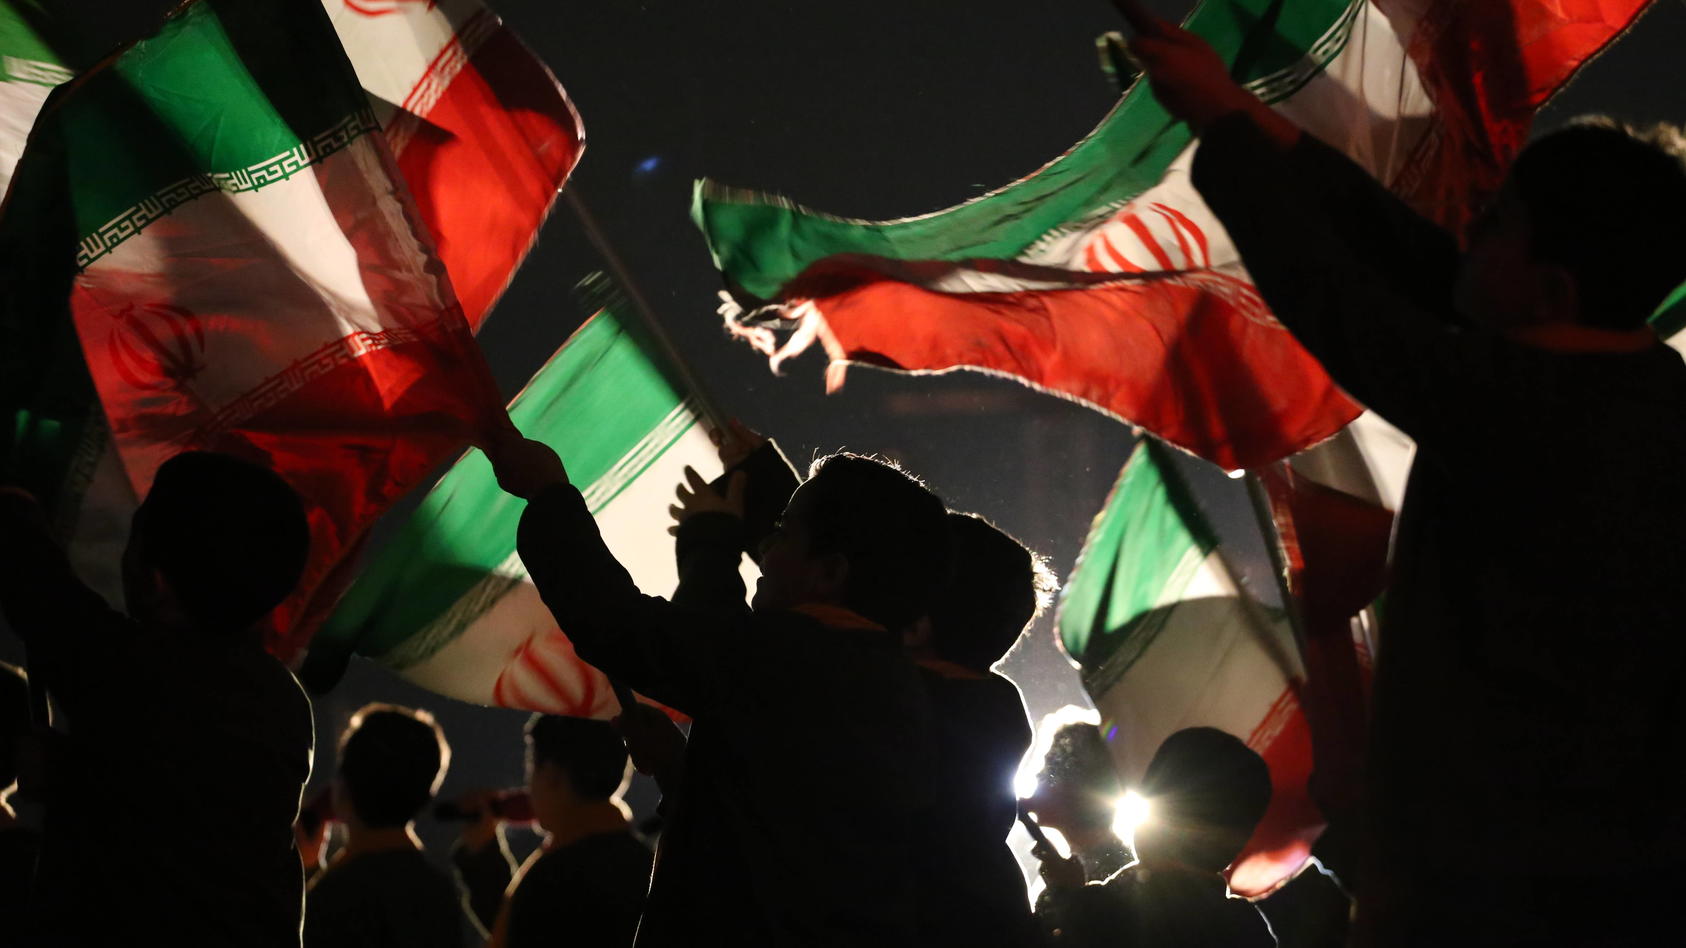 News Bilder des Tages February 10, 2023, Tehran, Tehran, Iran: Iranian students wave Iranian flags next to Azadi Freedom Tower during celebrations marking the anniversary of Iran s 1979 Islamic Revolution in Tehran, Iran, February 10, 2023. The gover